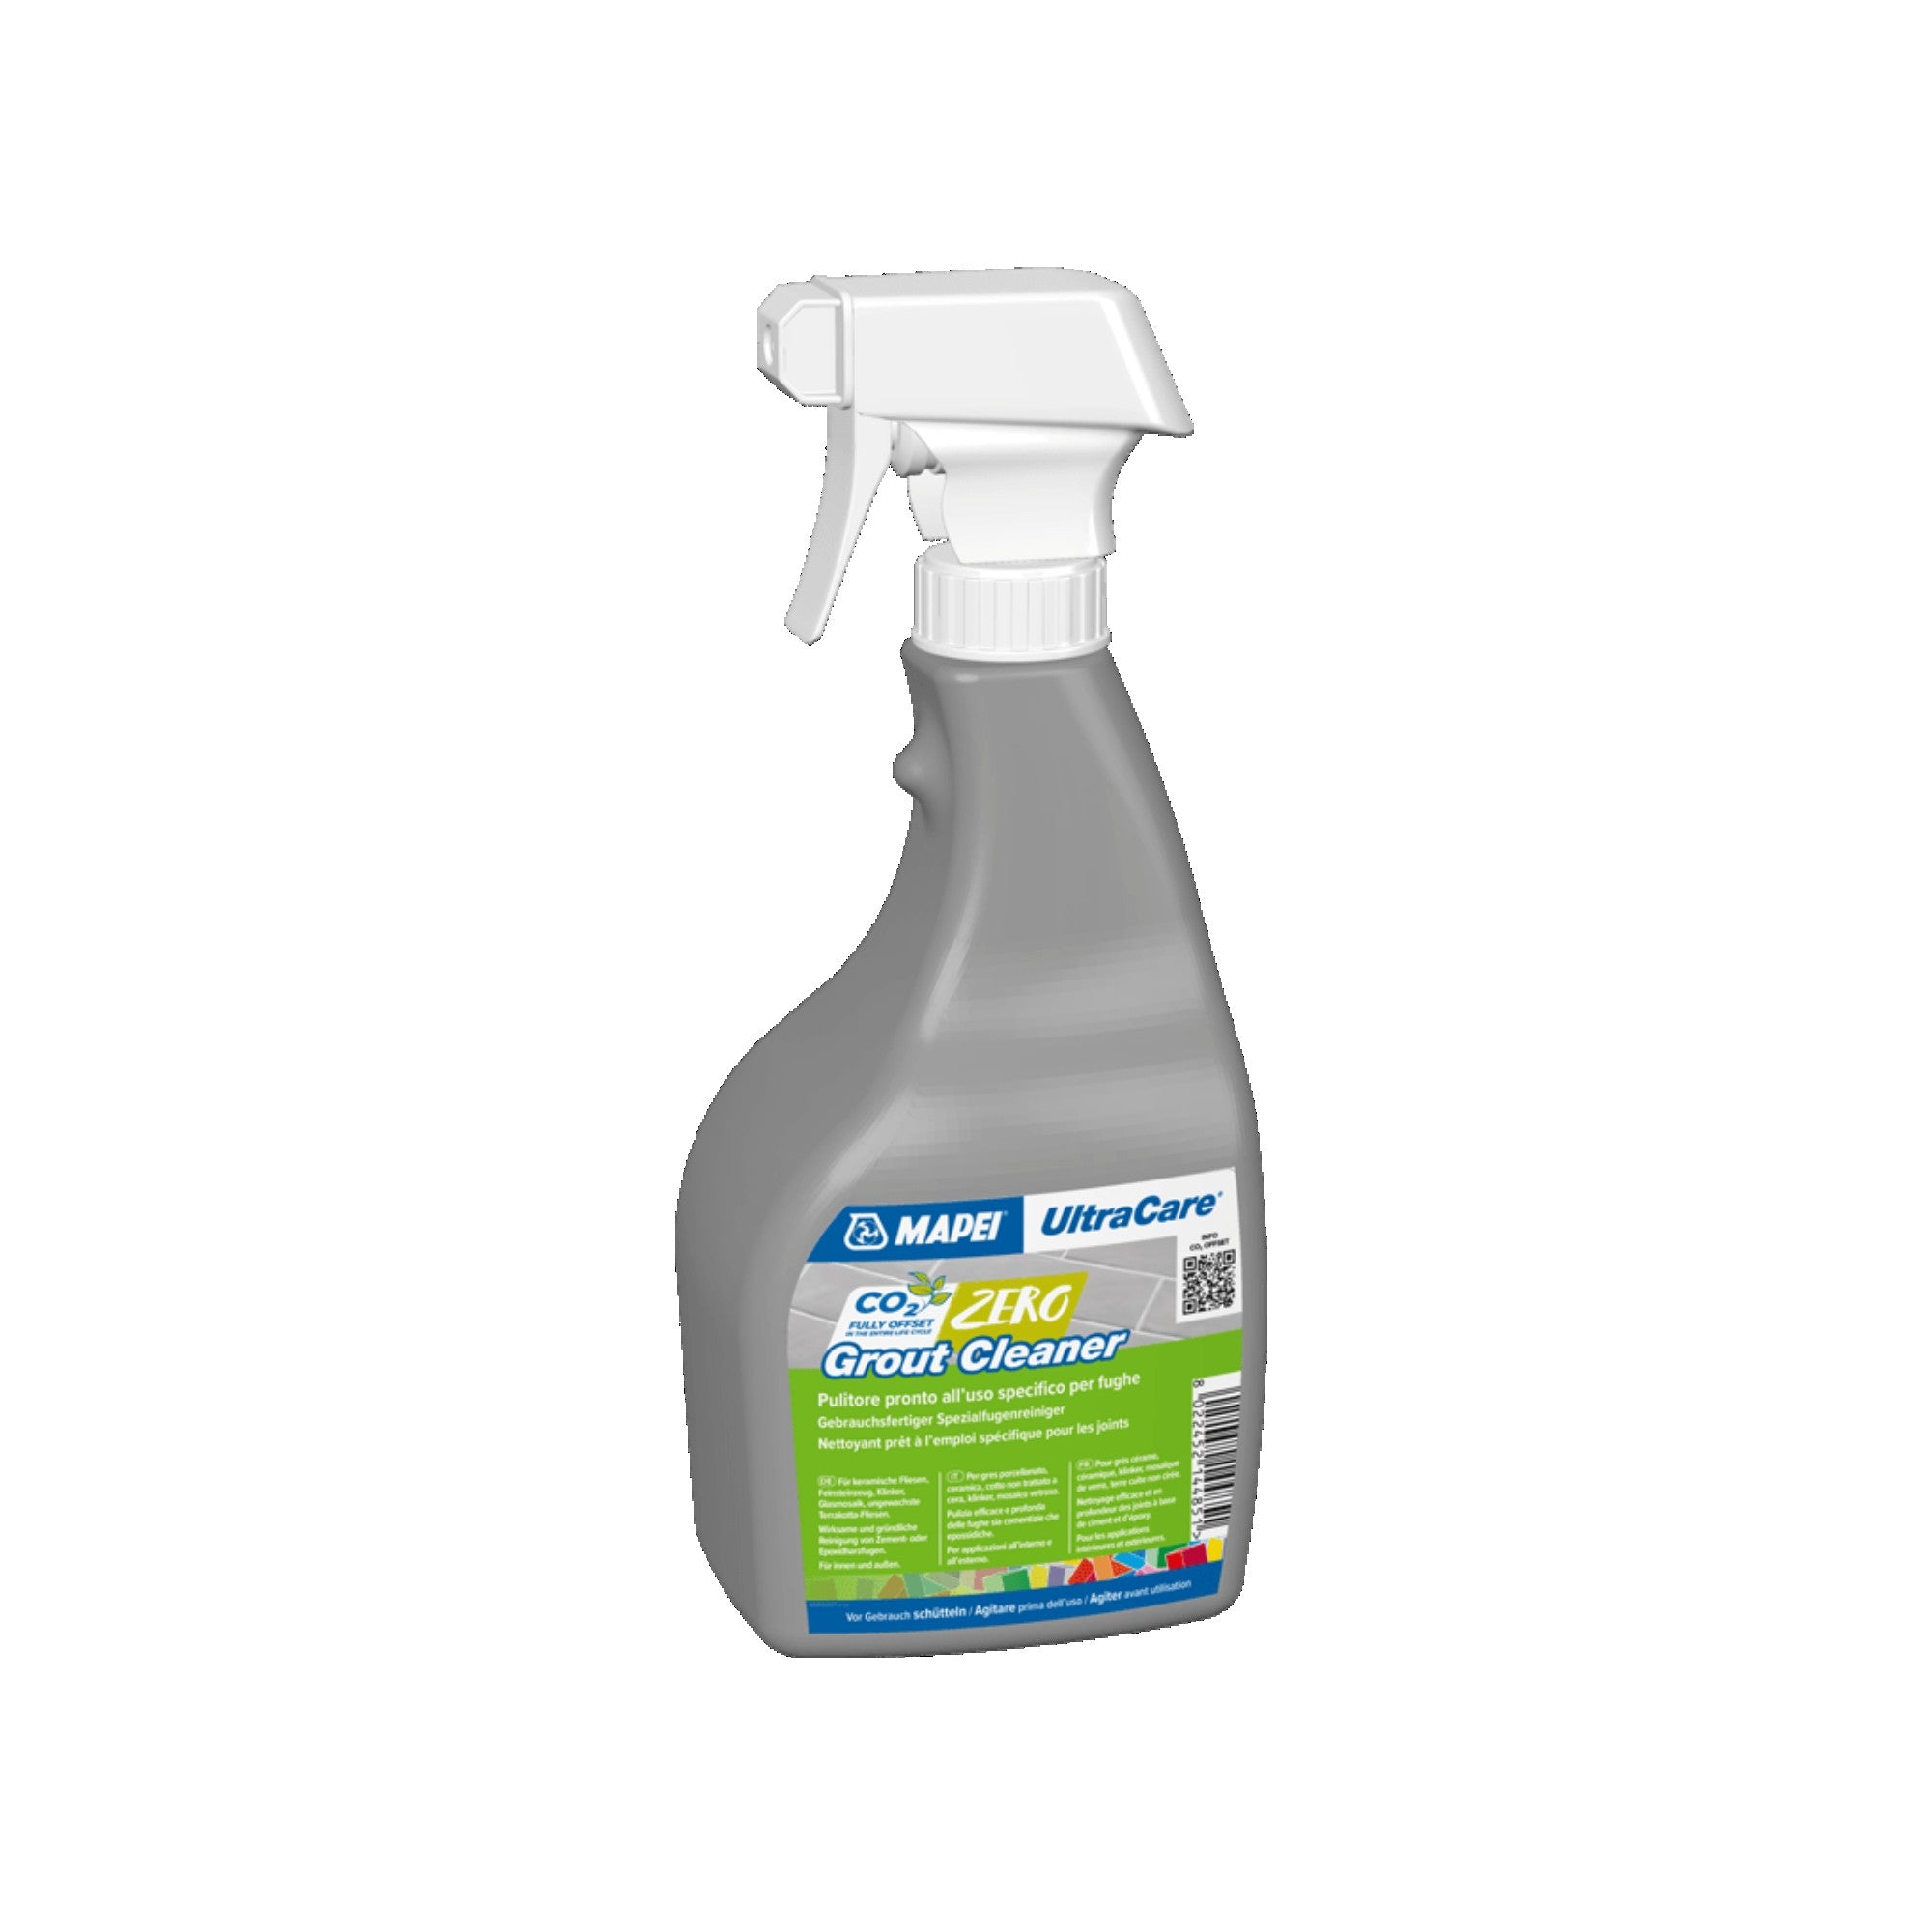 Mapei Ultra Care Grout Cleaner 0.75L Spray Bottle